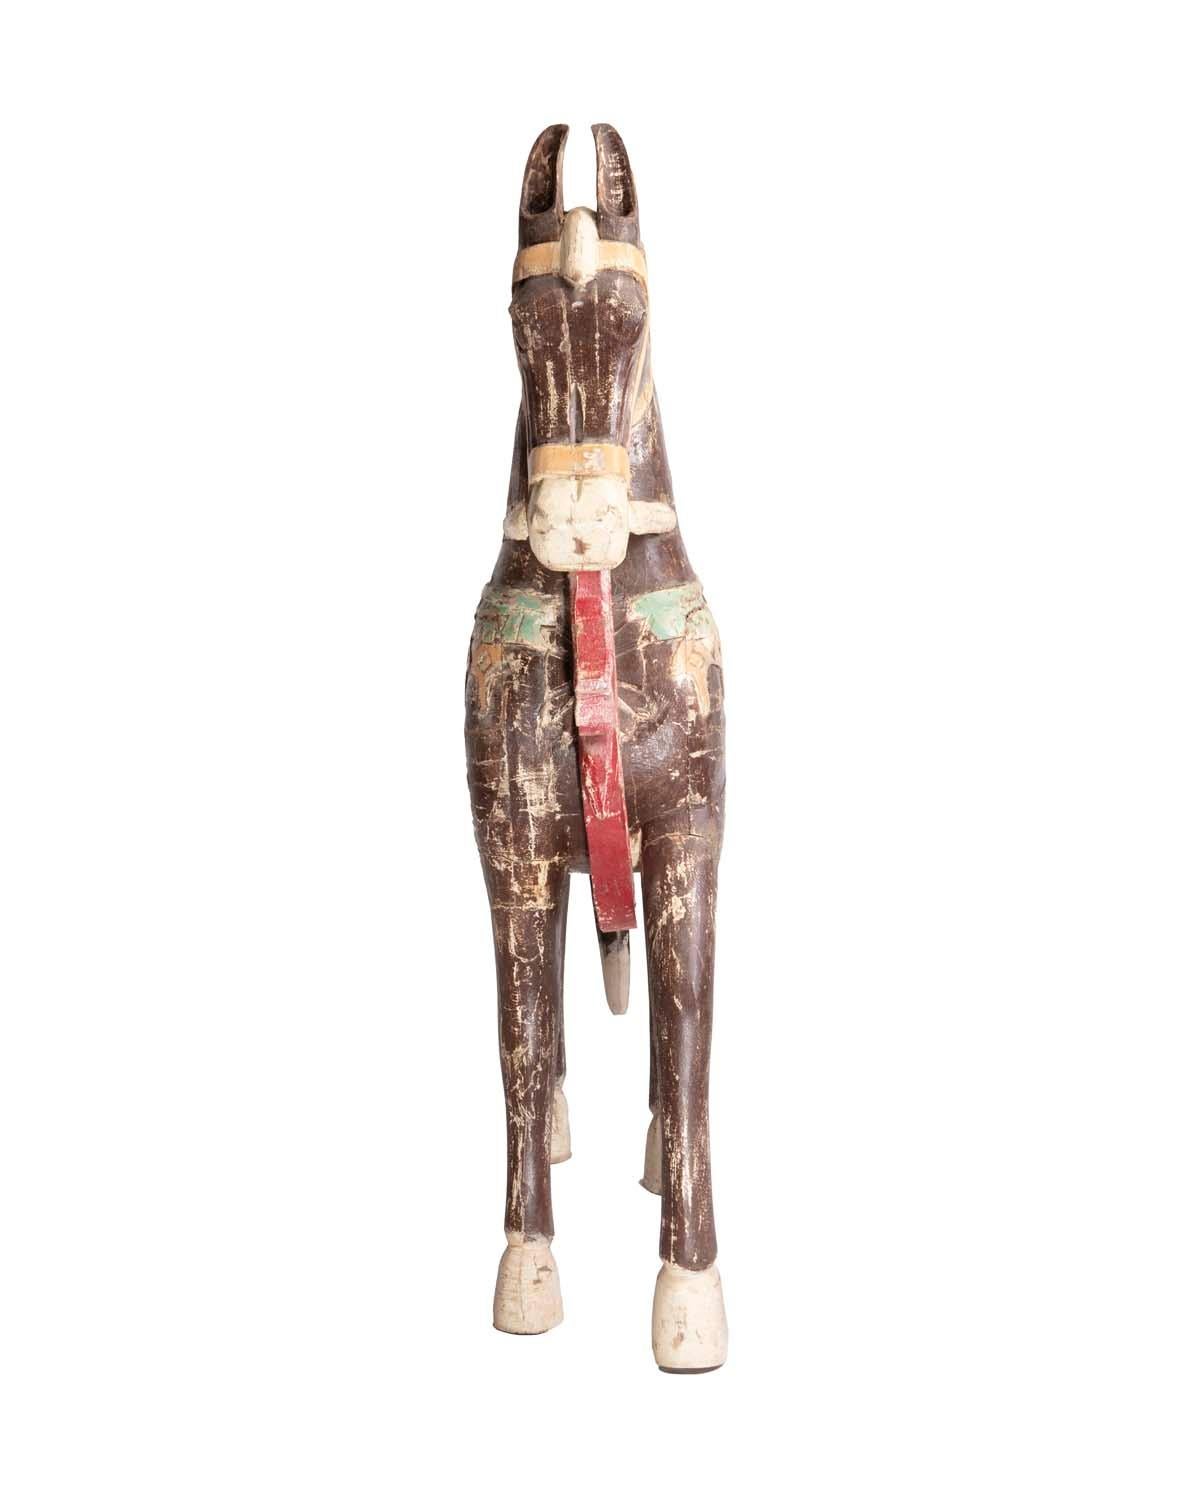 Carved Four Foot Tall Antique Hand-Painted Wooden Horse with Bird Saddle from India For Sale